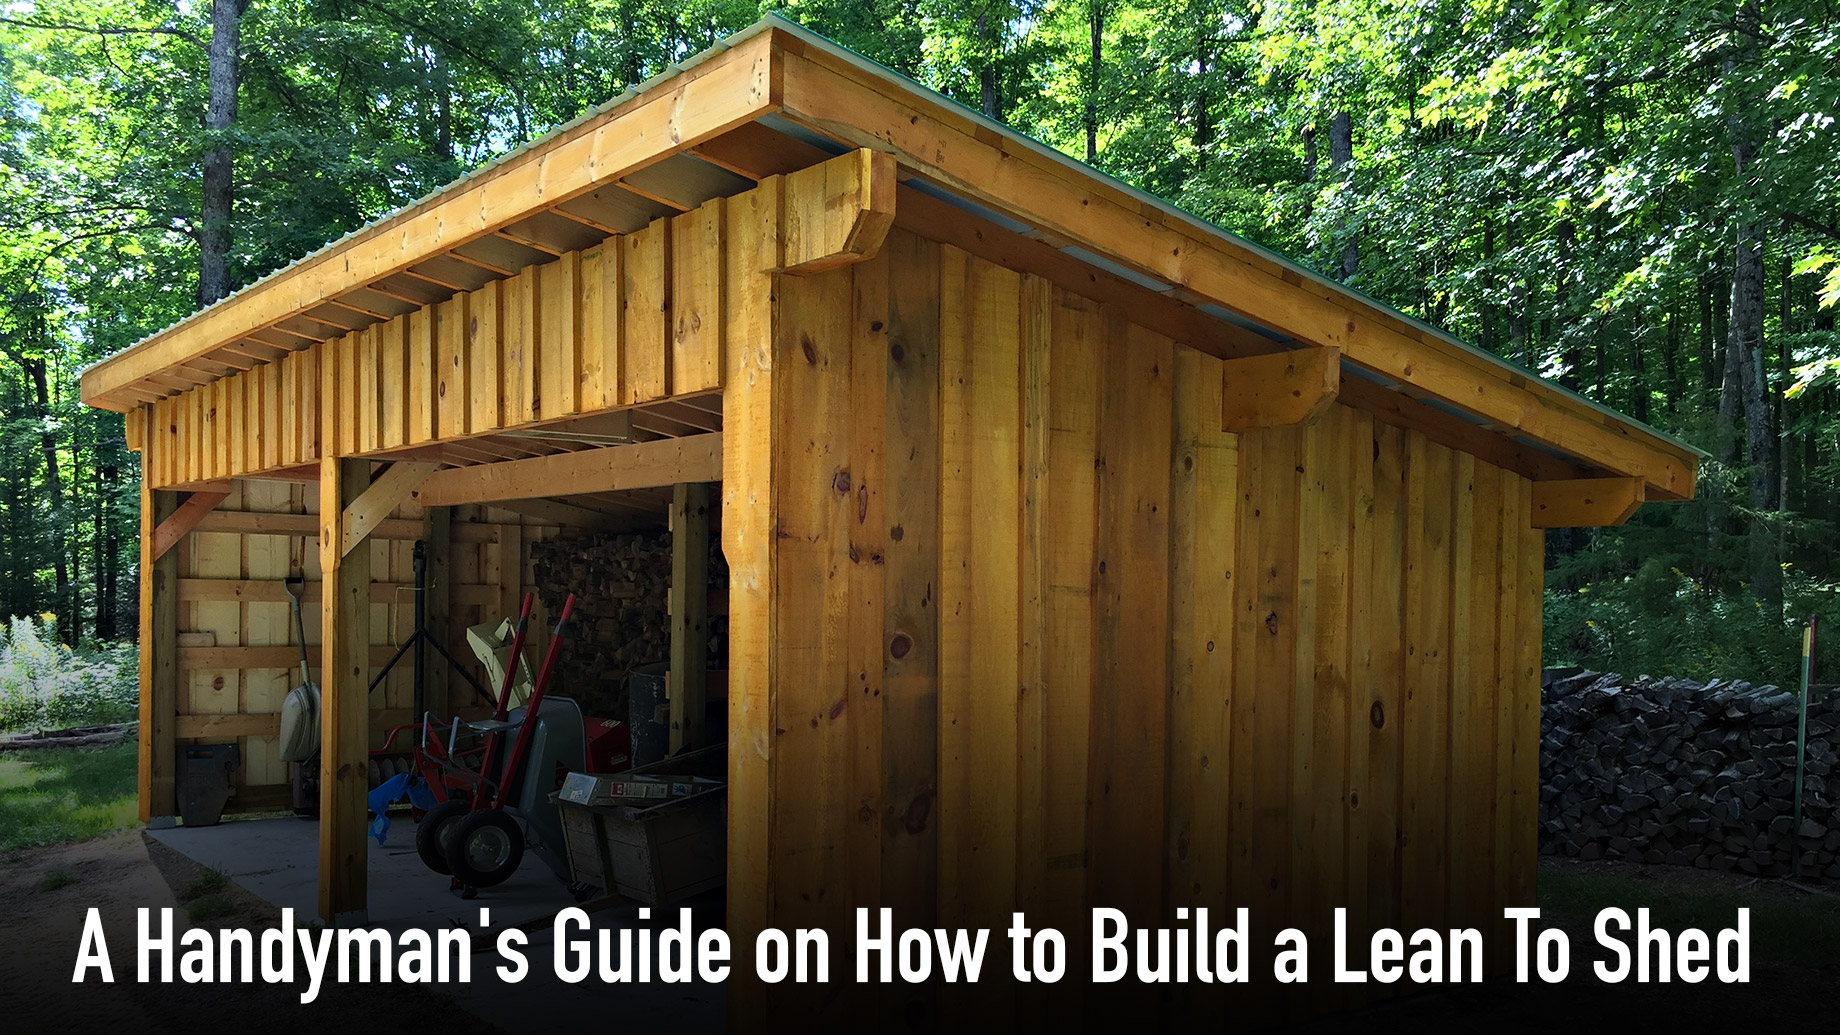 A Handyman's Guide on How to Build a Lean To Shed